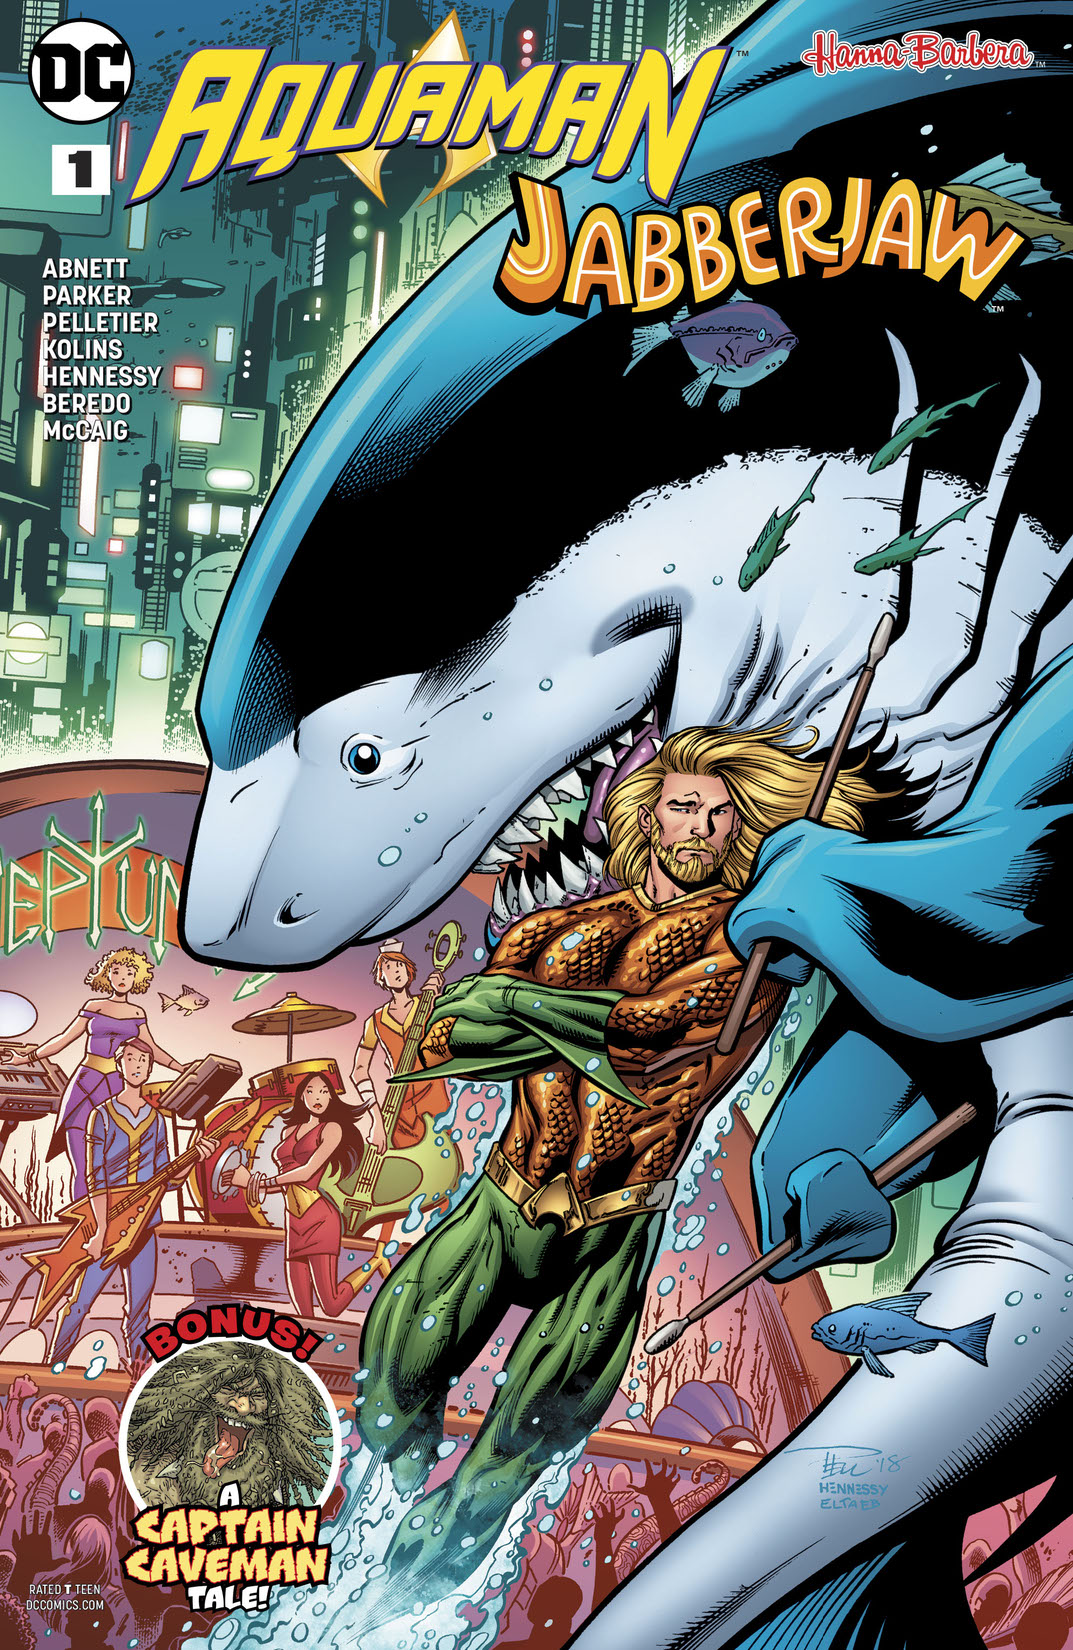 Aquaman/Jabberjaw Special #1 preview images